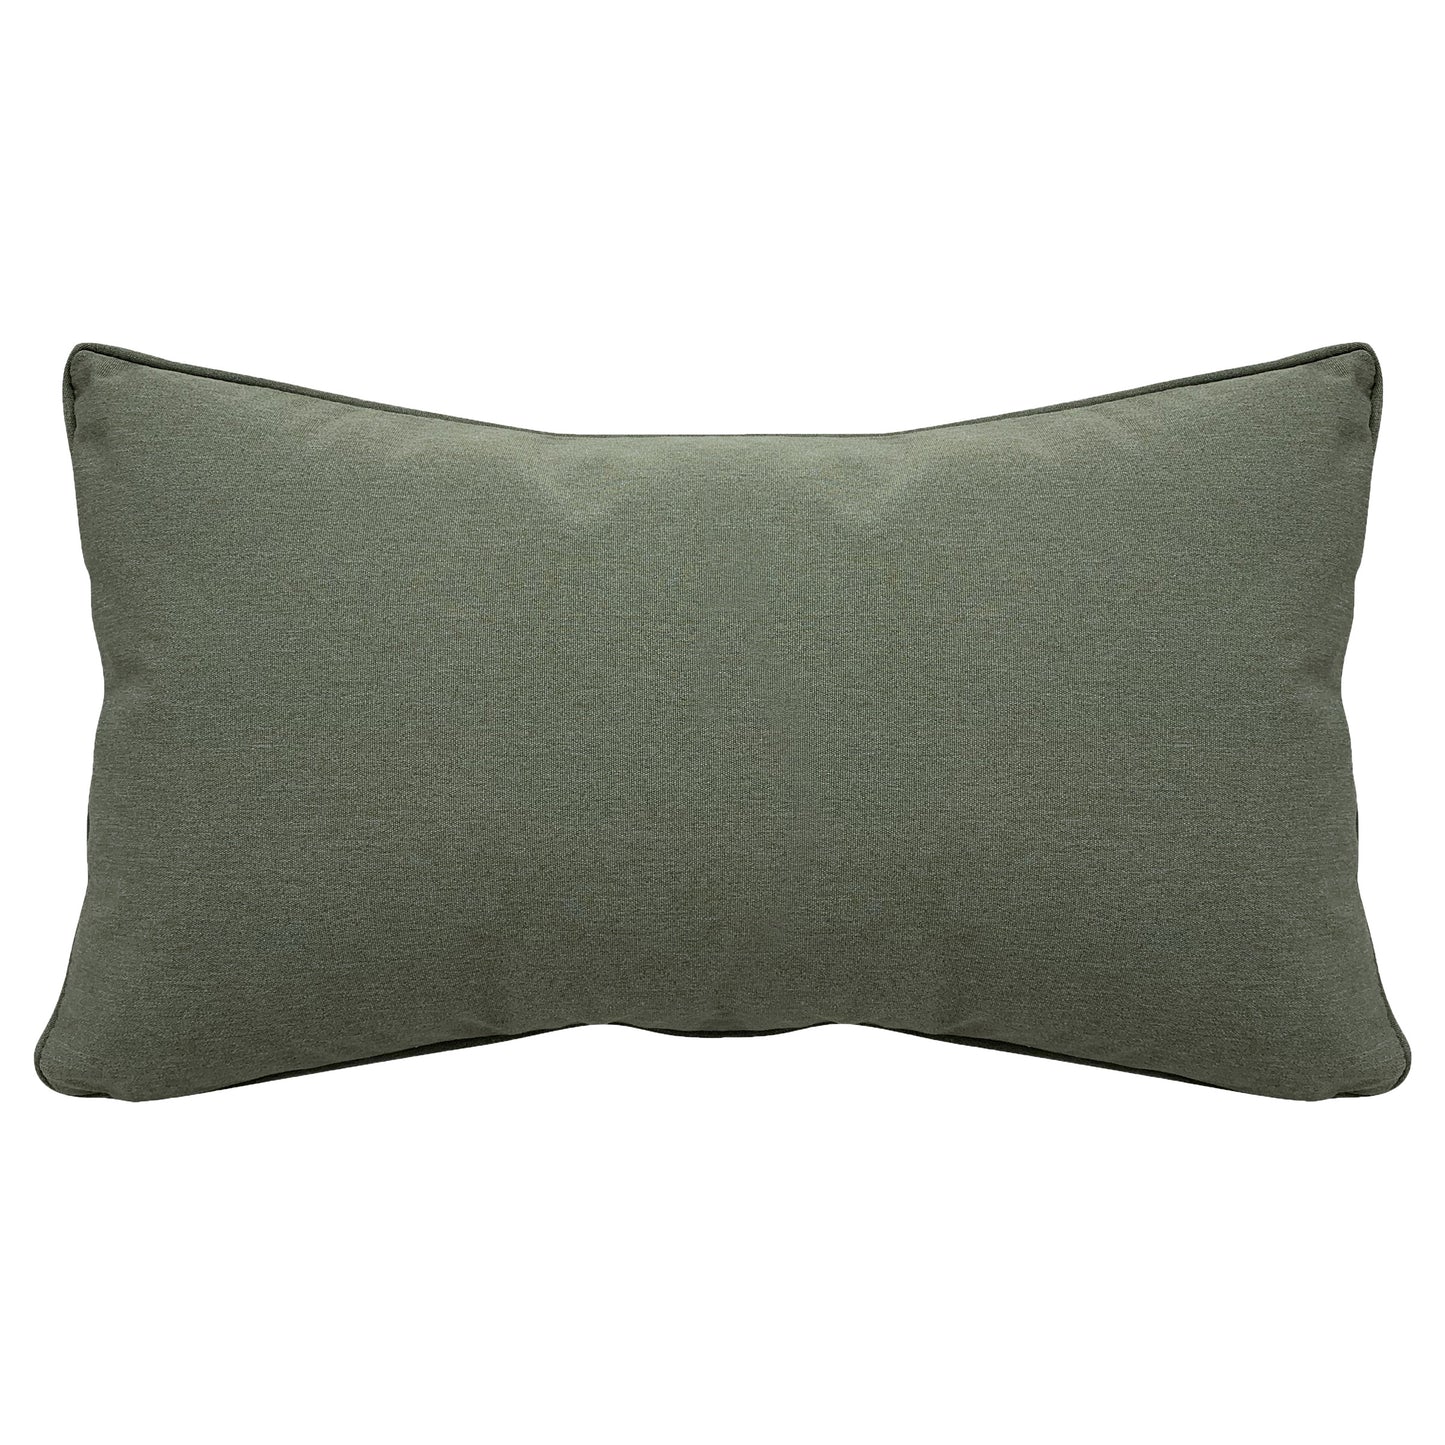 Solid green fabric; the back of the Herb Garden pillow